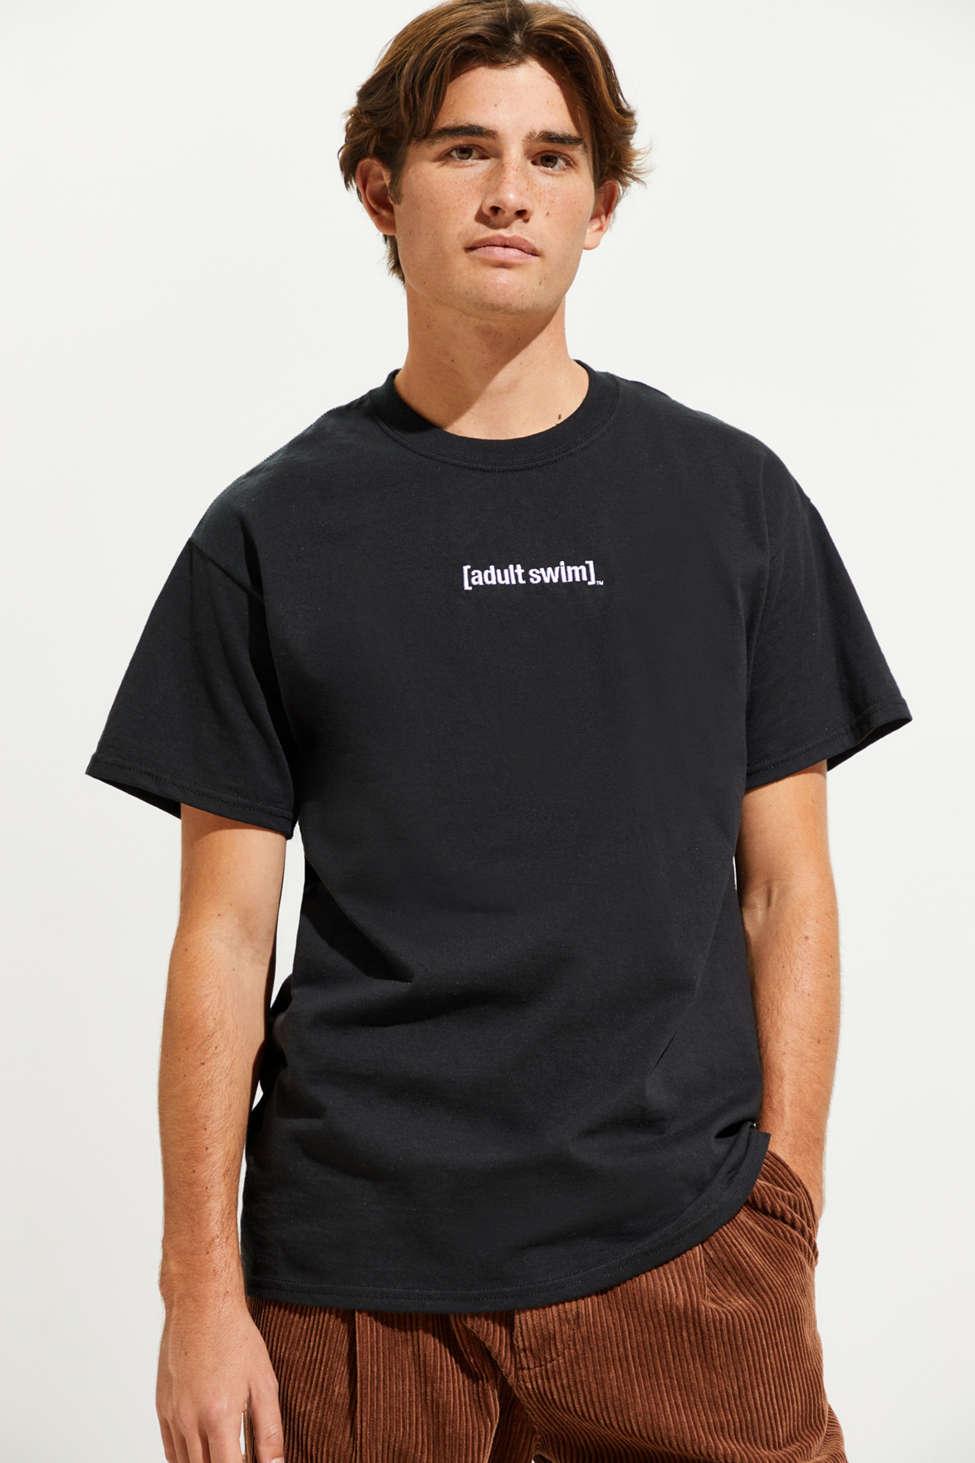 Urban Outfitters Adult Swim Logo Tee in Black for Men